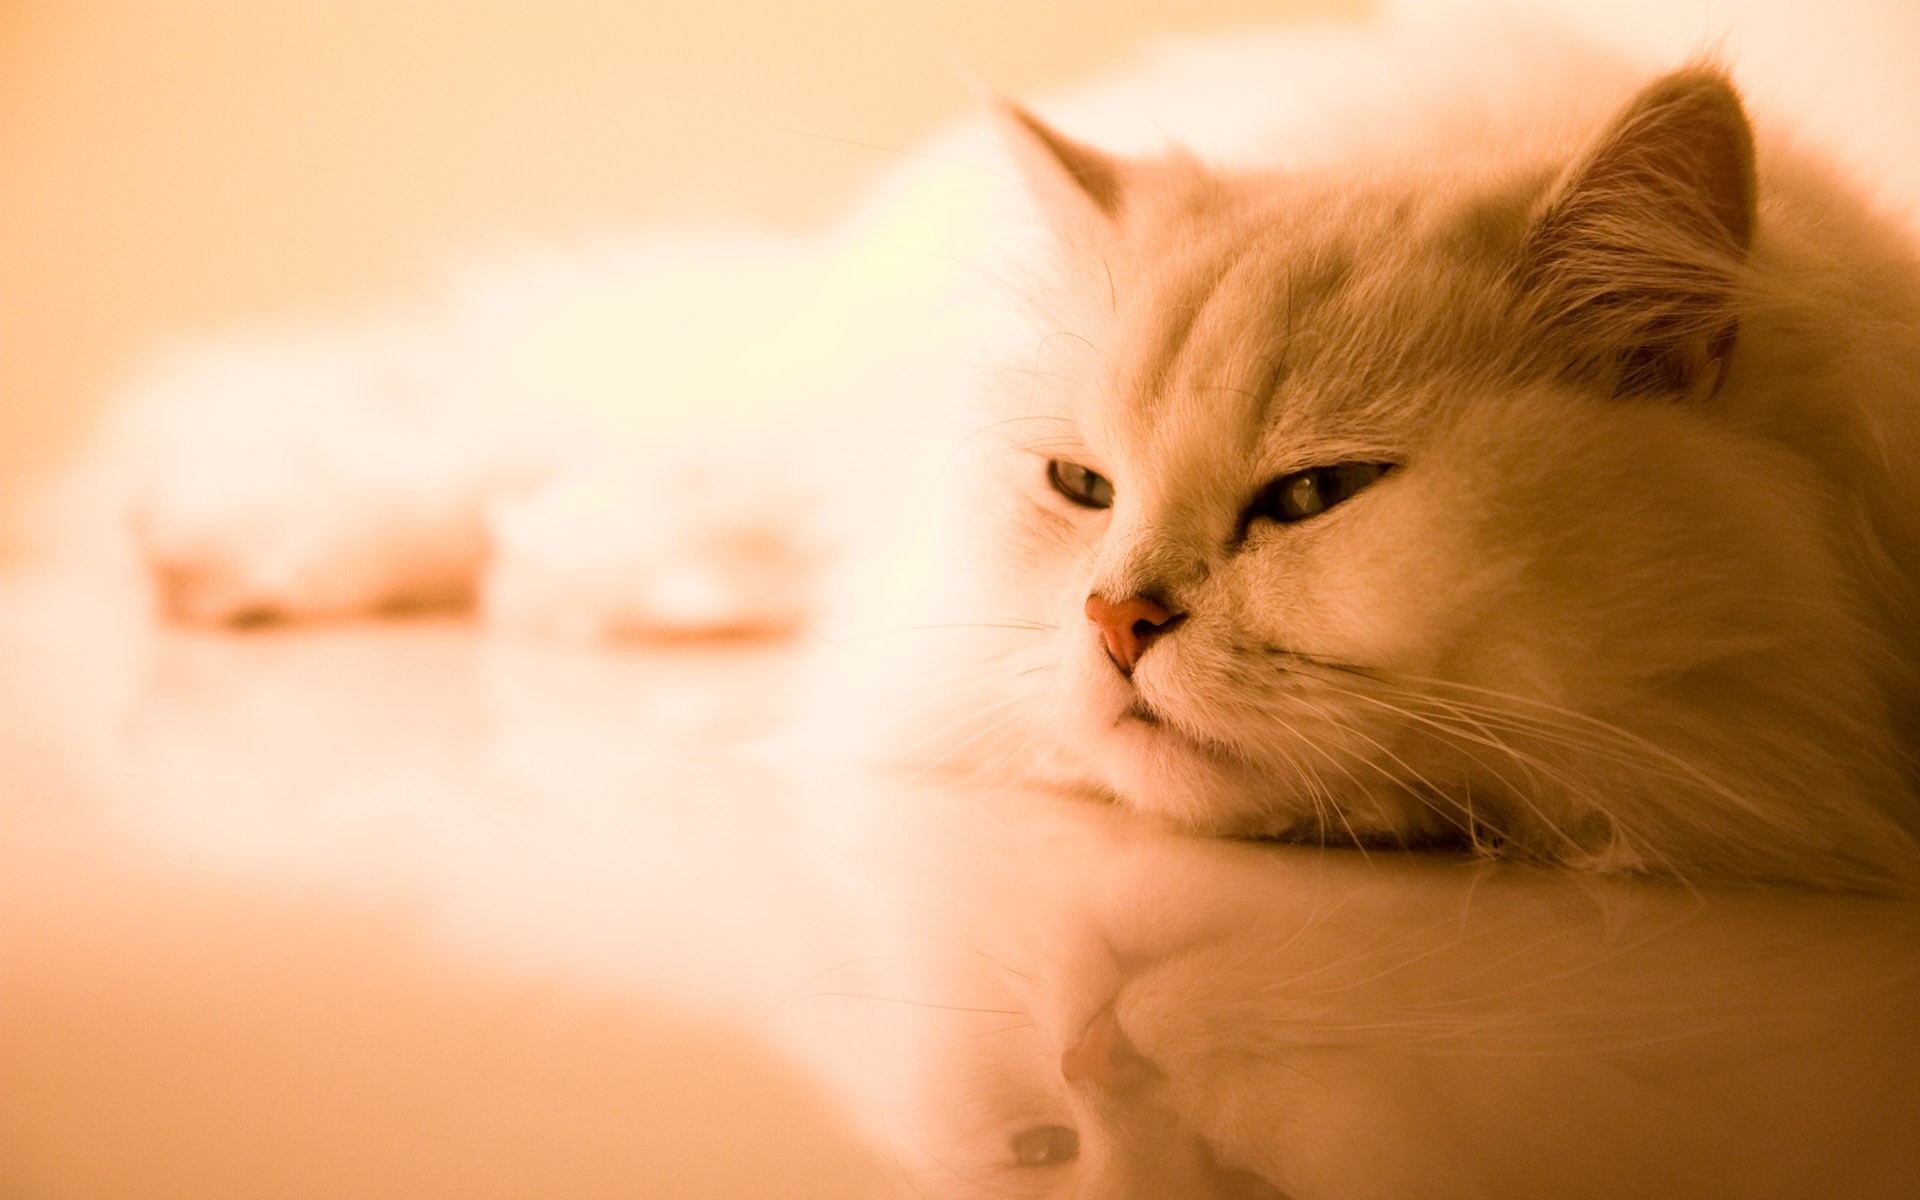 Cat photo HD Wallpapers #35 - 1920x1200